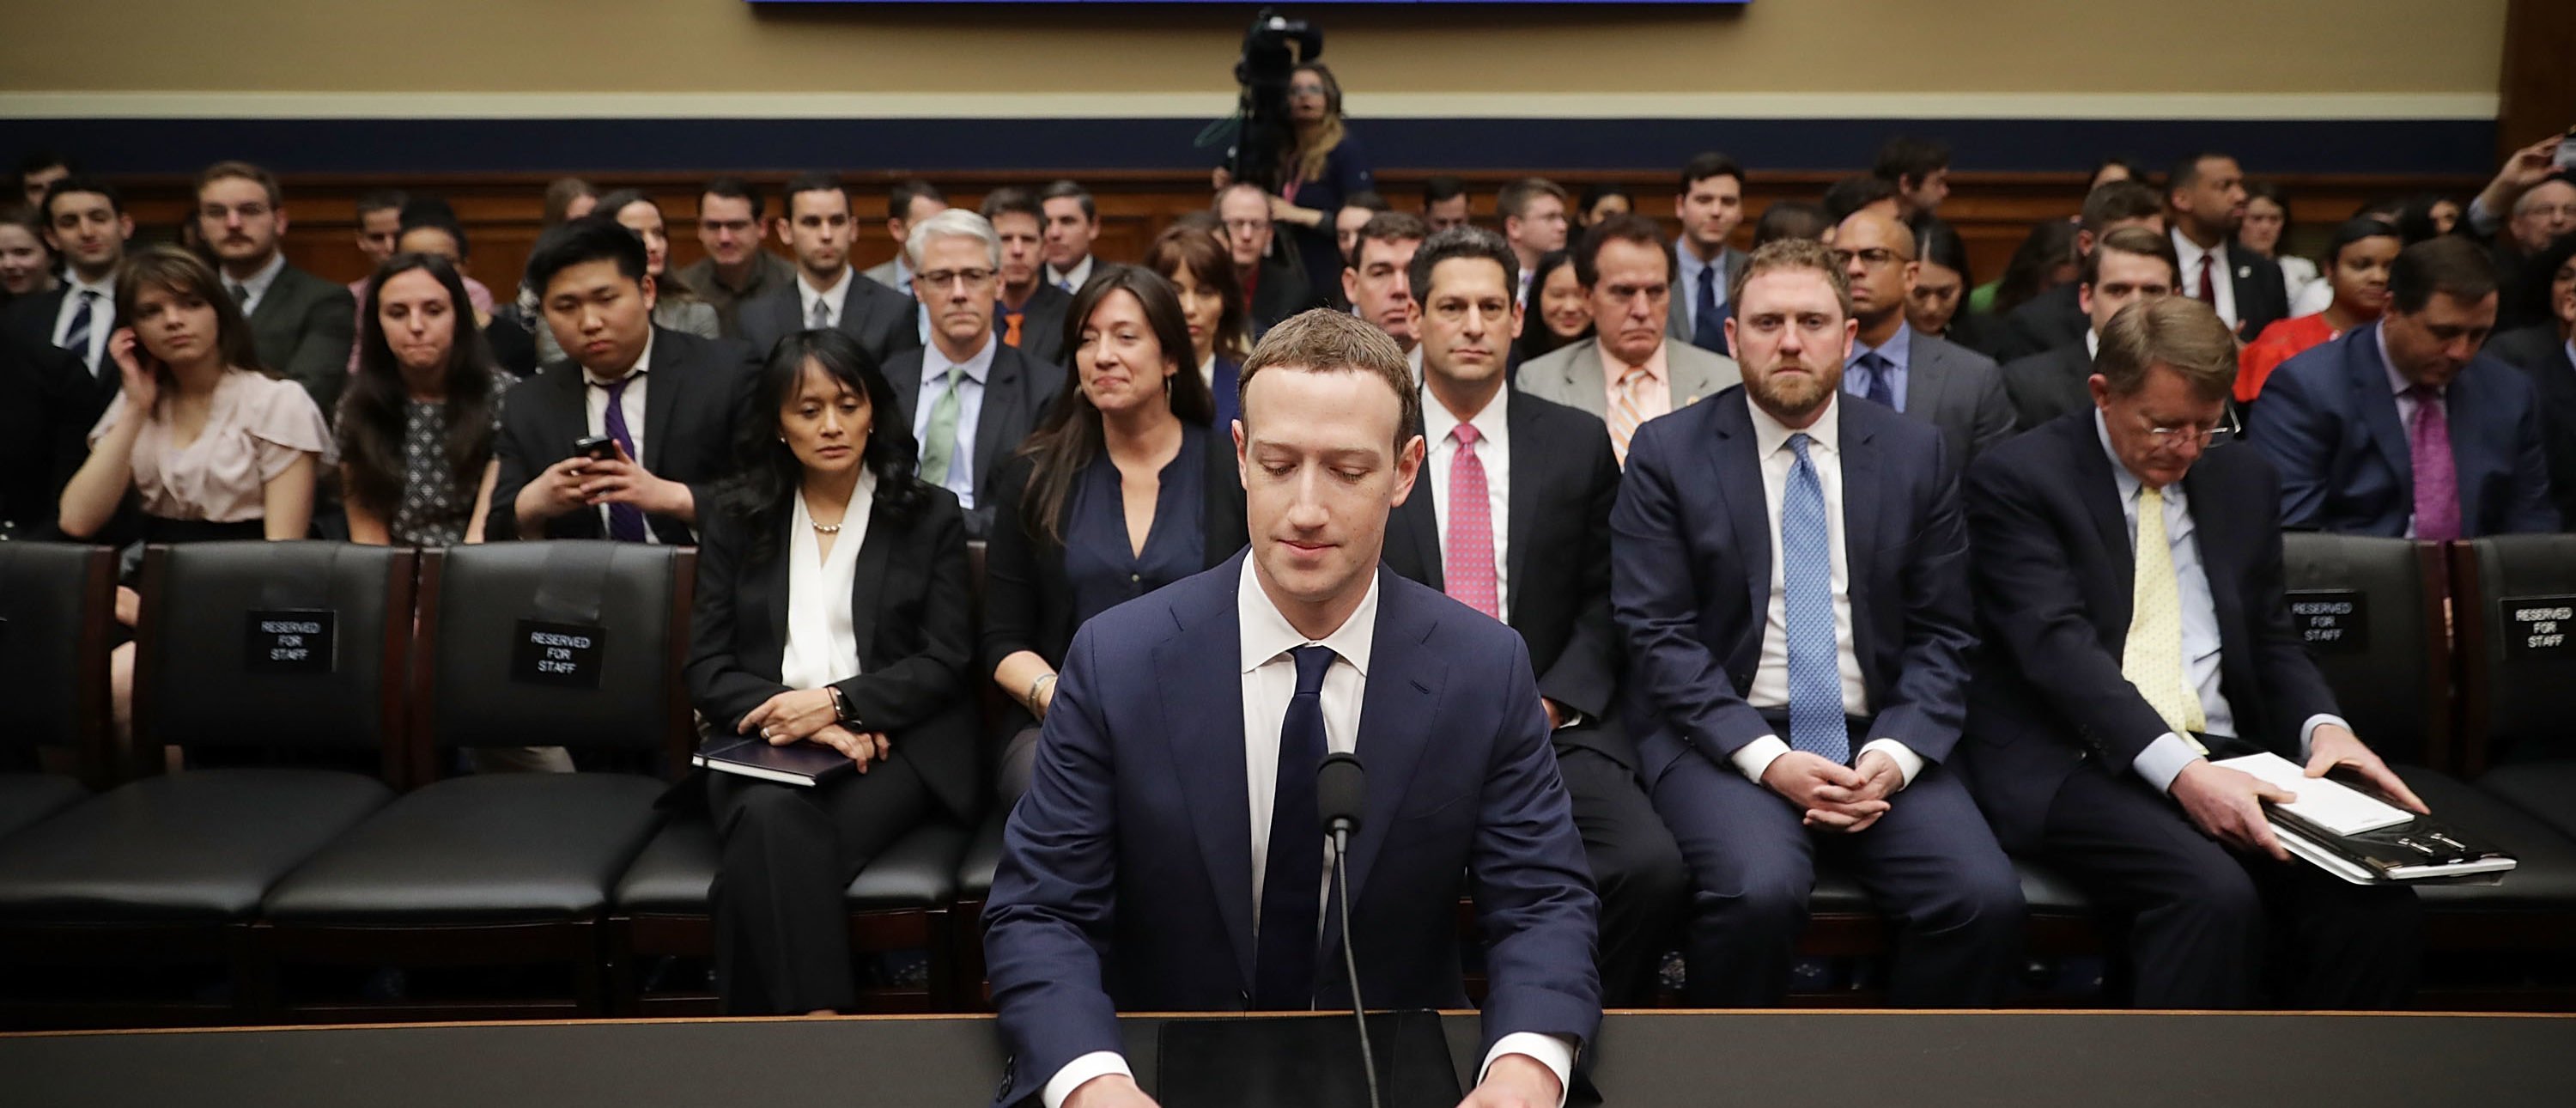 WASHINGTON, DC - APRIL 11: Facebook co-founder, Chairman and CEO Mark Zuckerberg prepares to testify before the House Energy and Commerce Committee in the Rayburn House Office Building on Capitol Hill April 11, 2018 in Washington, DC. This is the second day of testimony before Congress by Zuckerberg, 33, after it was reported that 87 million Facebook users had their personal information harvested by Cambridge Analytica, a British political consulting firm linked to the Trump campaign. (Photo by Chip Somodevilla/Getty Images)